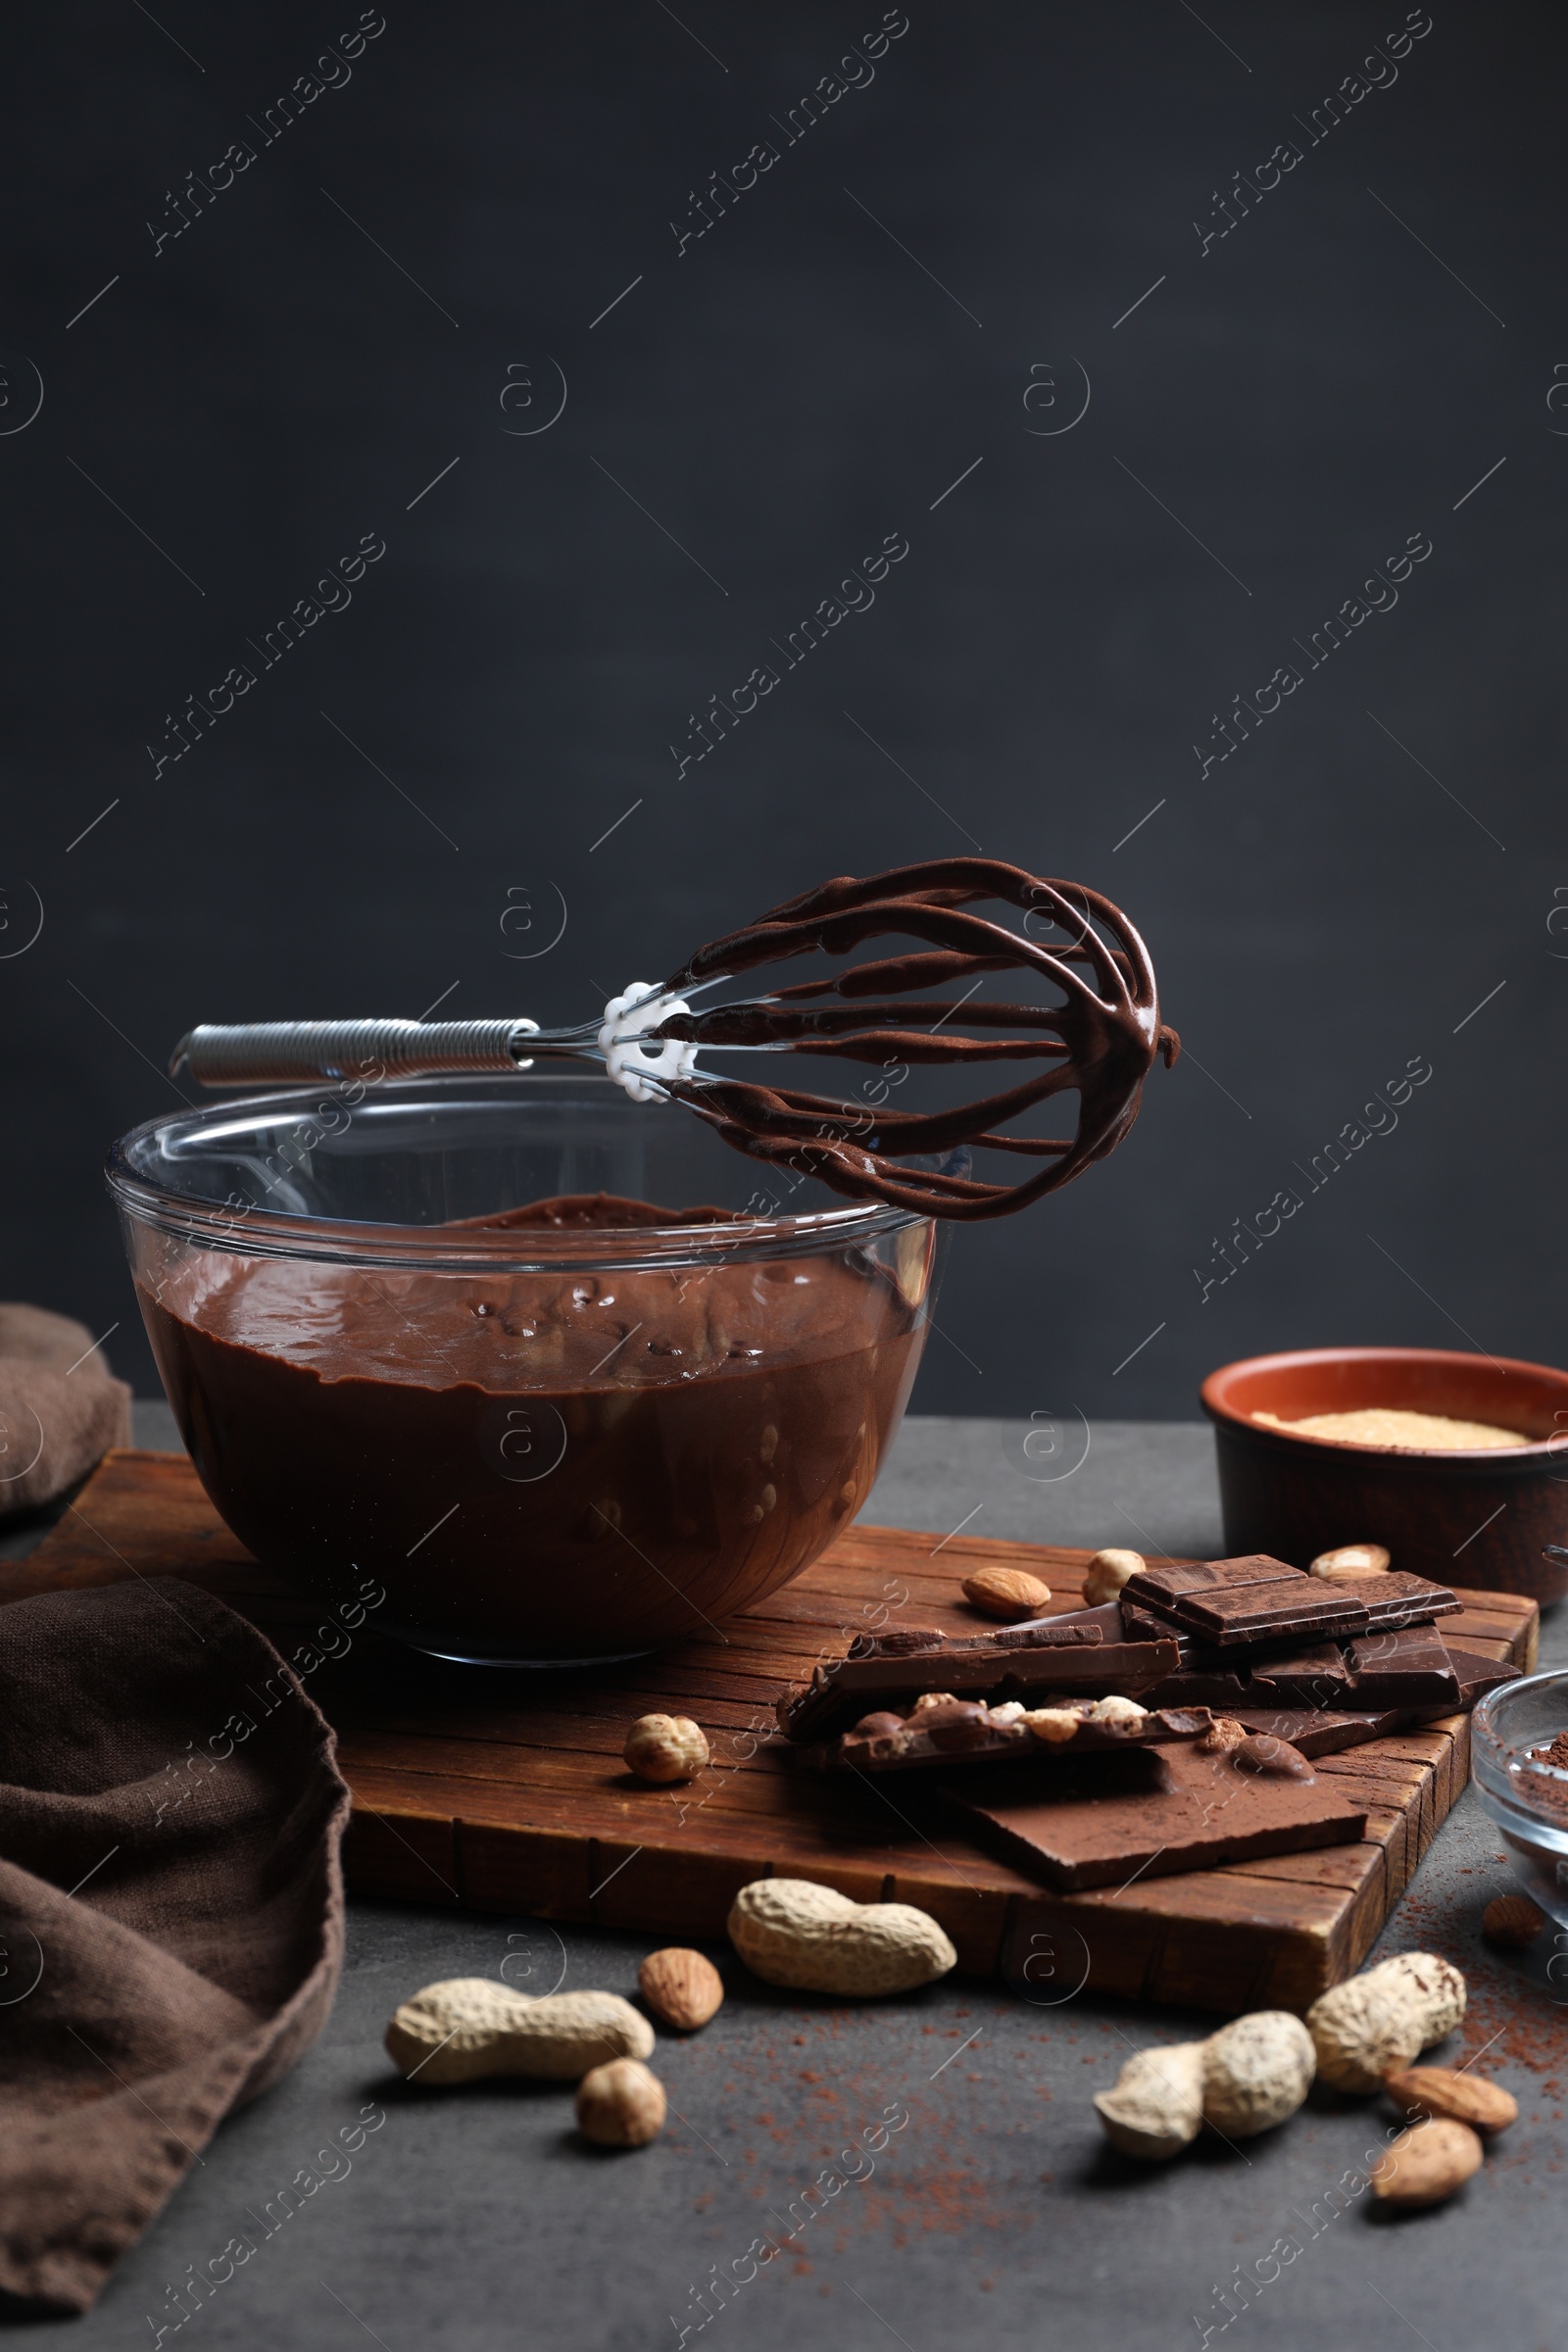 Photo of Bowl of chocolate cream, whisk and ingredients on gray table against dark background, space for text